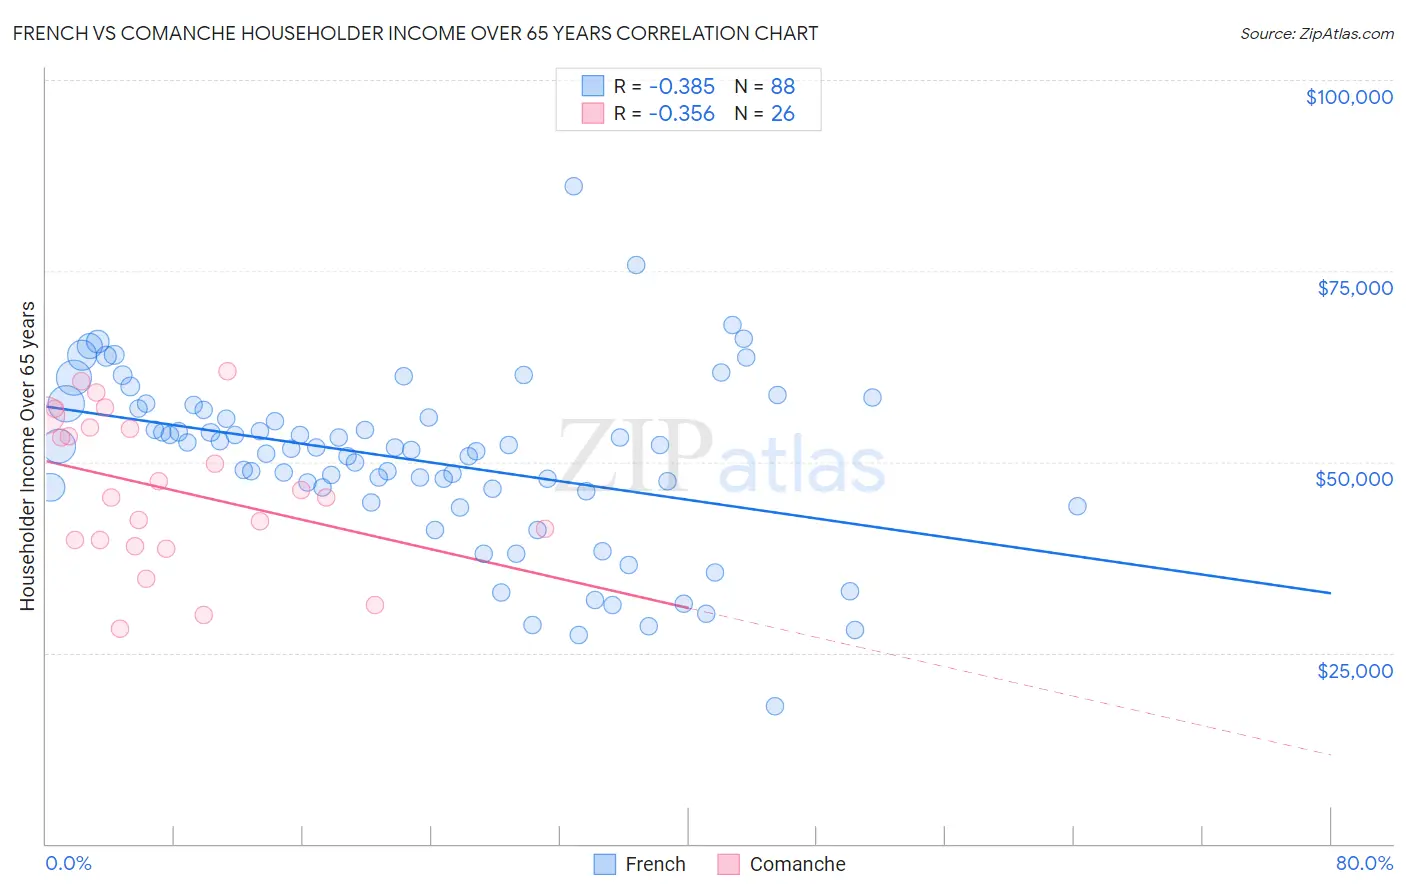 French vs Comanche Householder Income Over 65 years